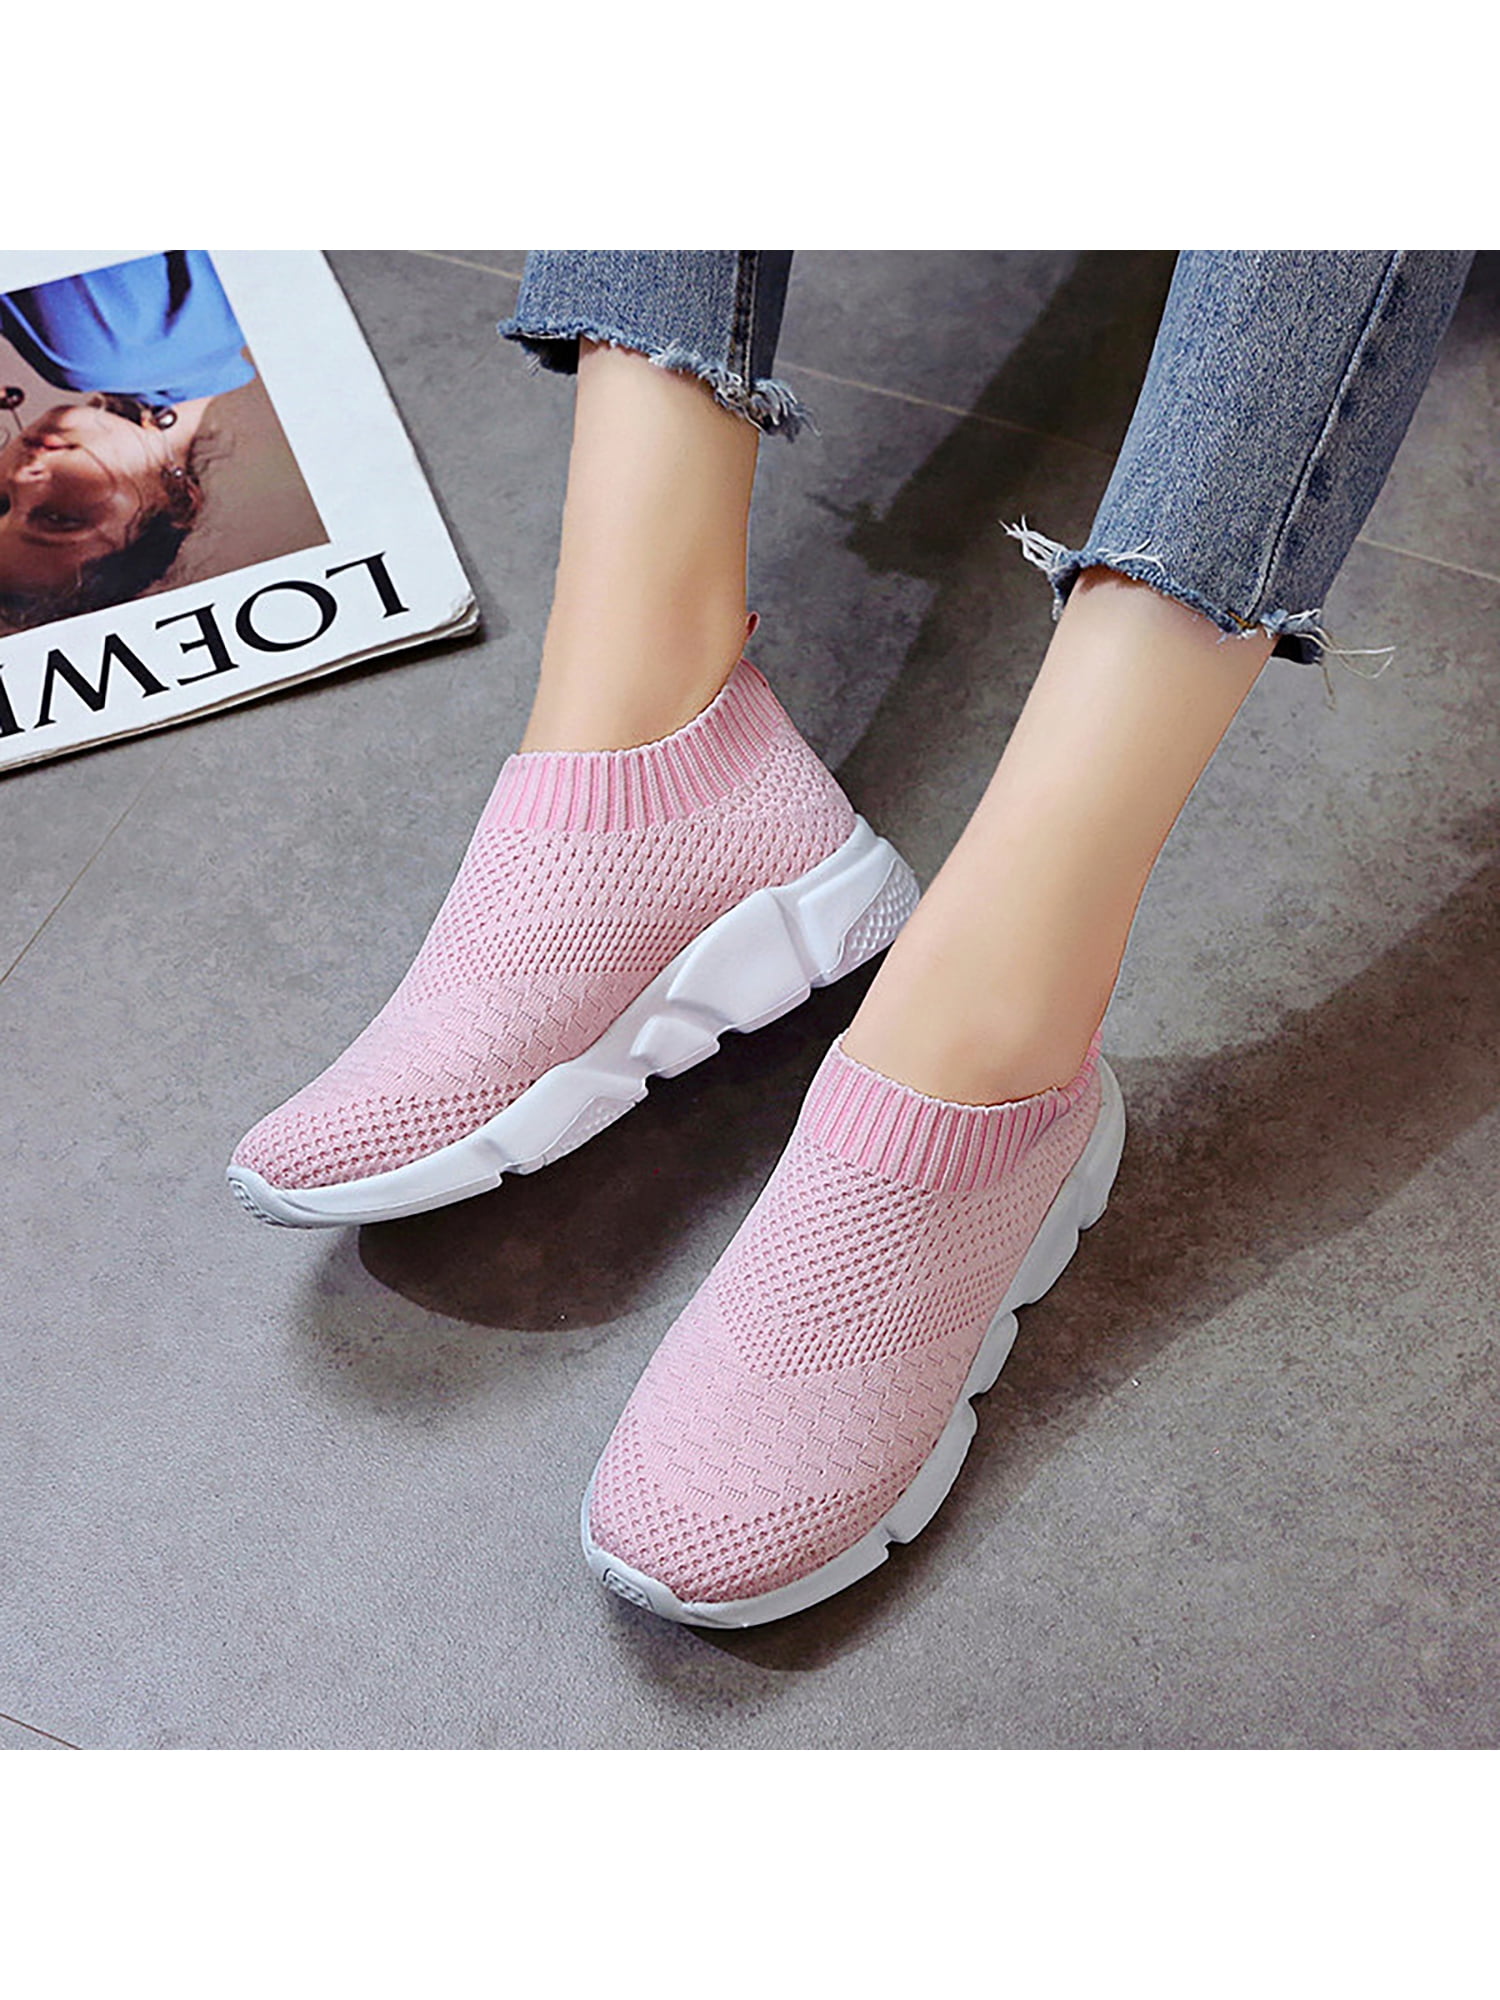 Women's Sneakers Knitted Mesh Breathable Shoes Walking Slip On Flats Sock Shoes 